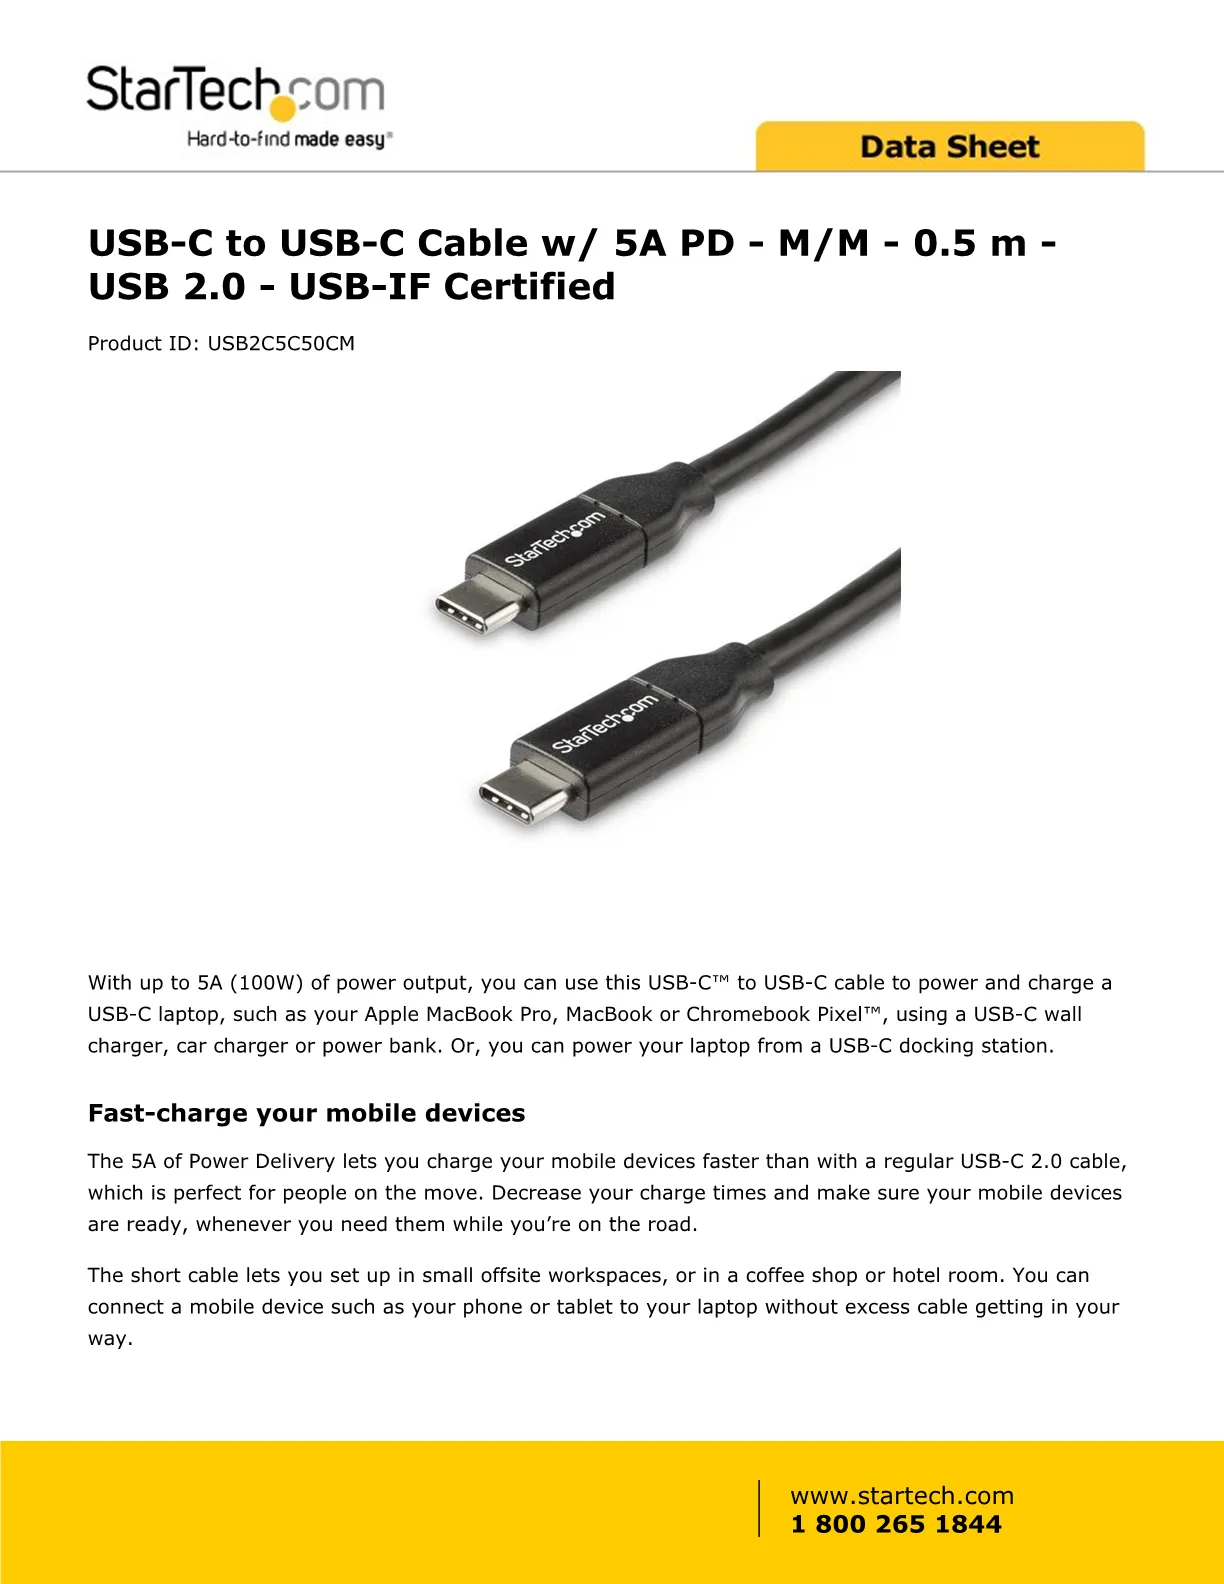 StarTech.com USB2C5C50CM USB C to USB C Cable - 1.5 ft / 0.5m - 5A PD -  White - USB 2.0 - USB-IF Certified - USB Type C Cable - USB C Charging Cable